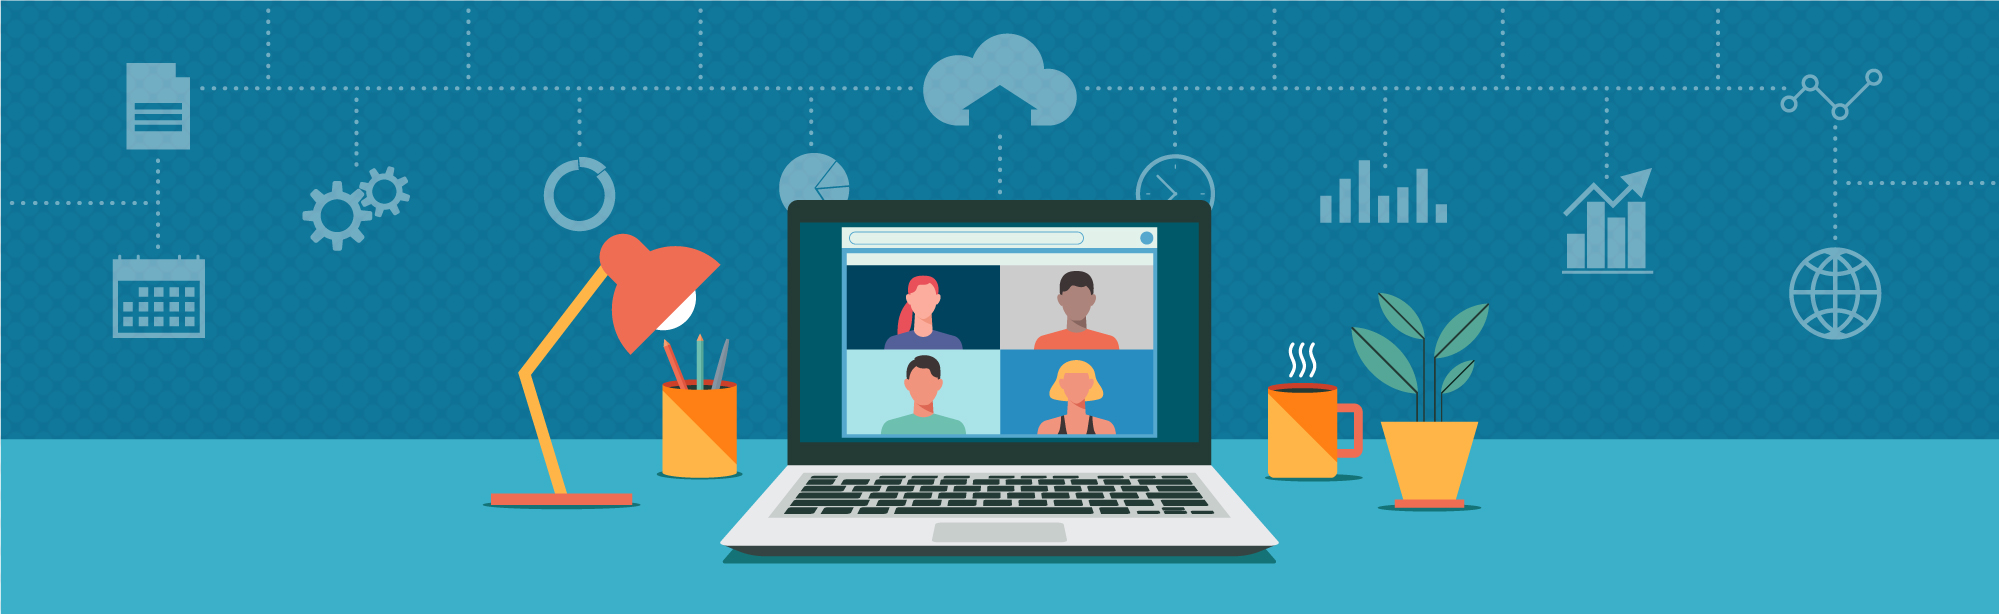 Online learners join a synchronous video call; How to Uphold Academic Integrity in a Remote Learning Environment: 3 Tactics to Consider